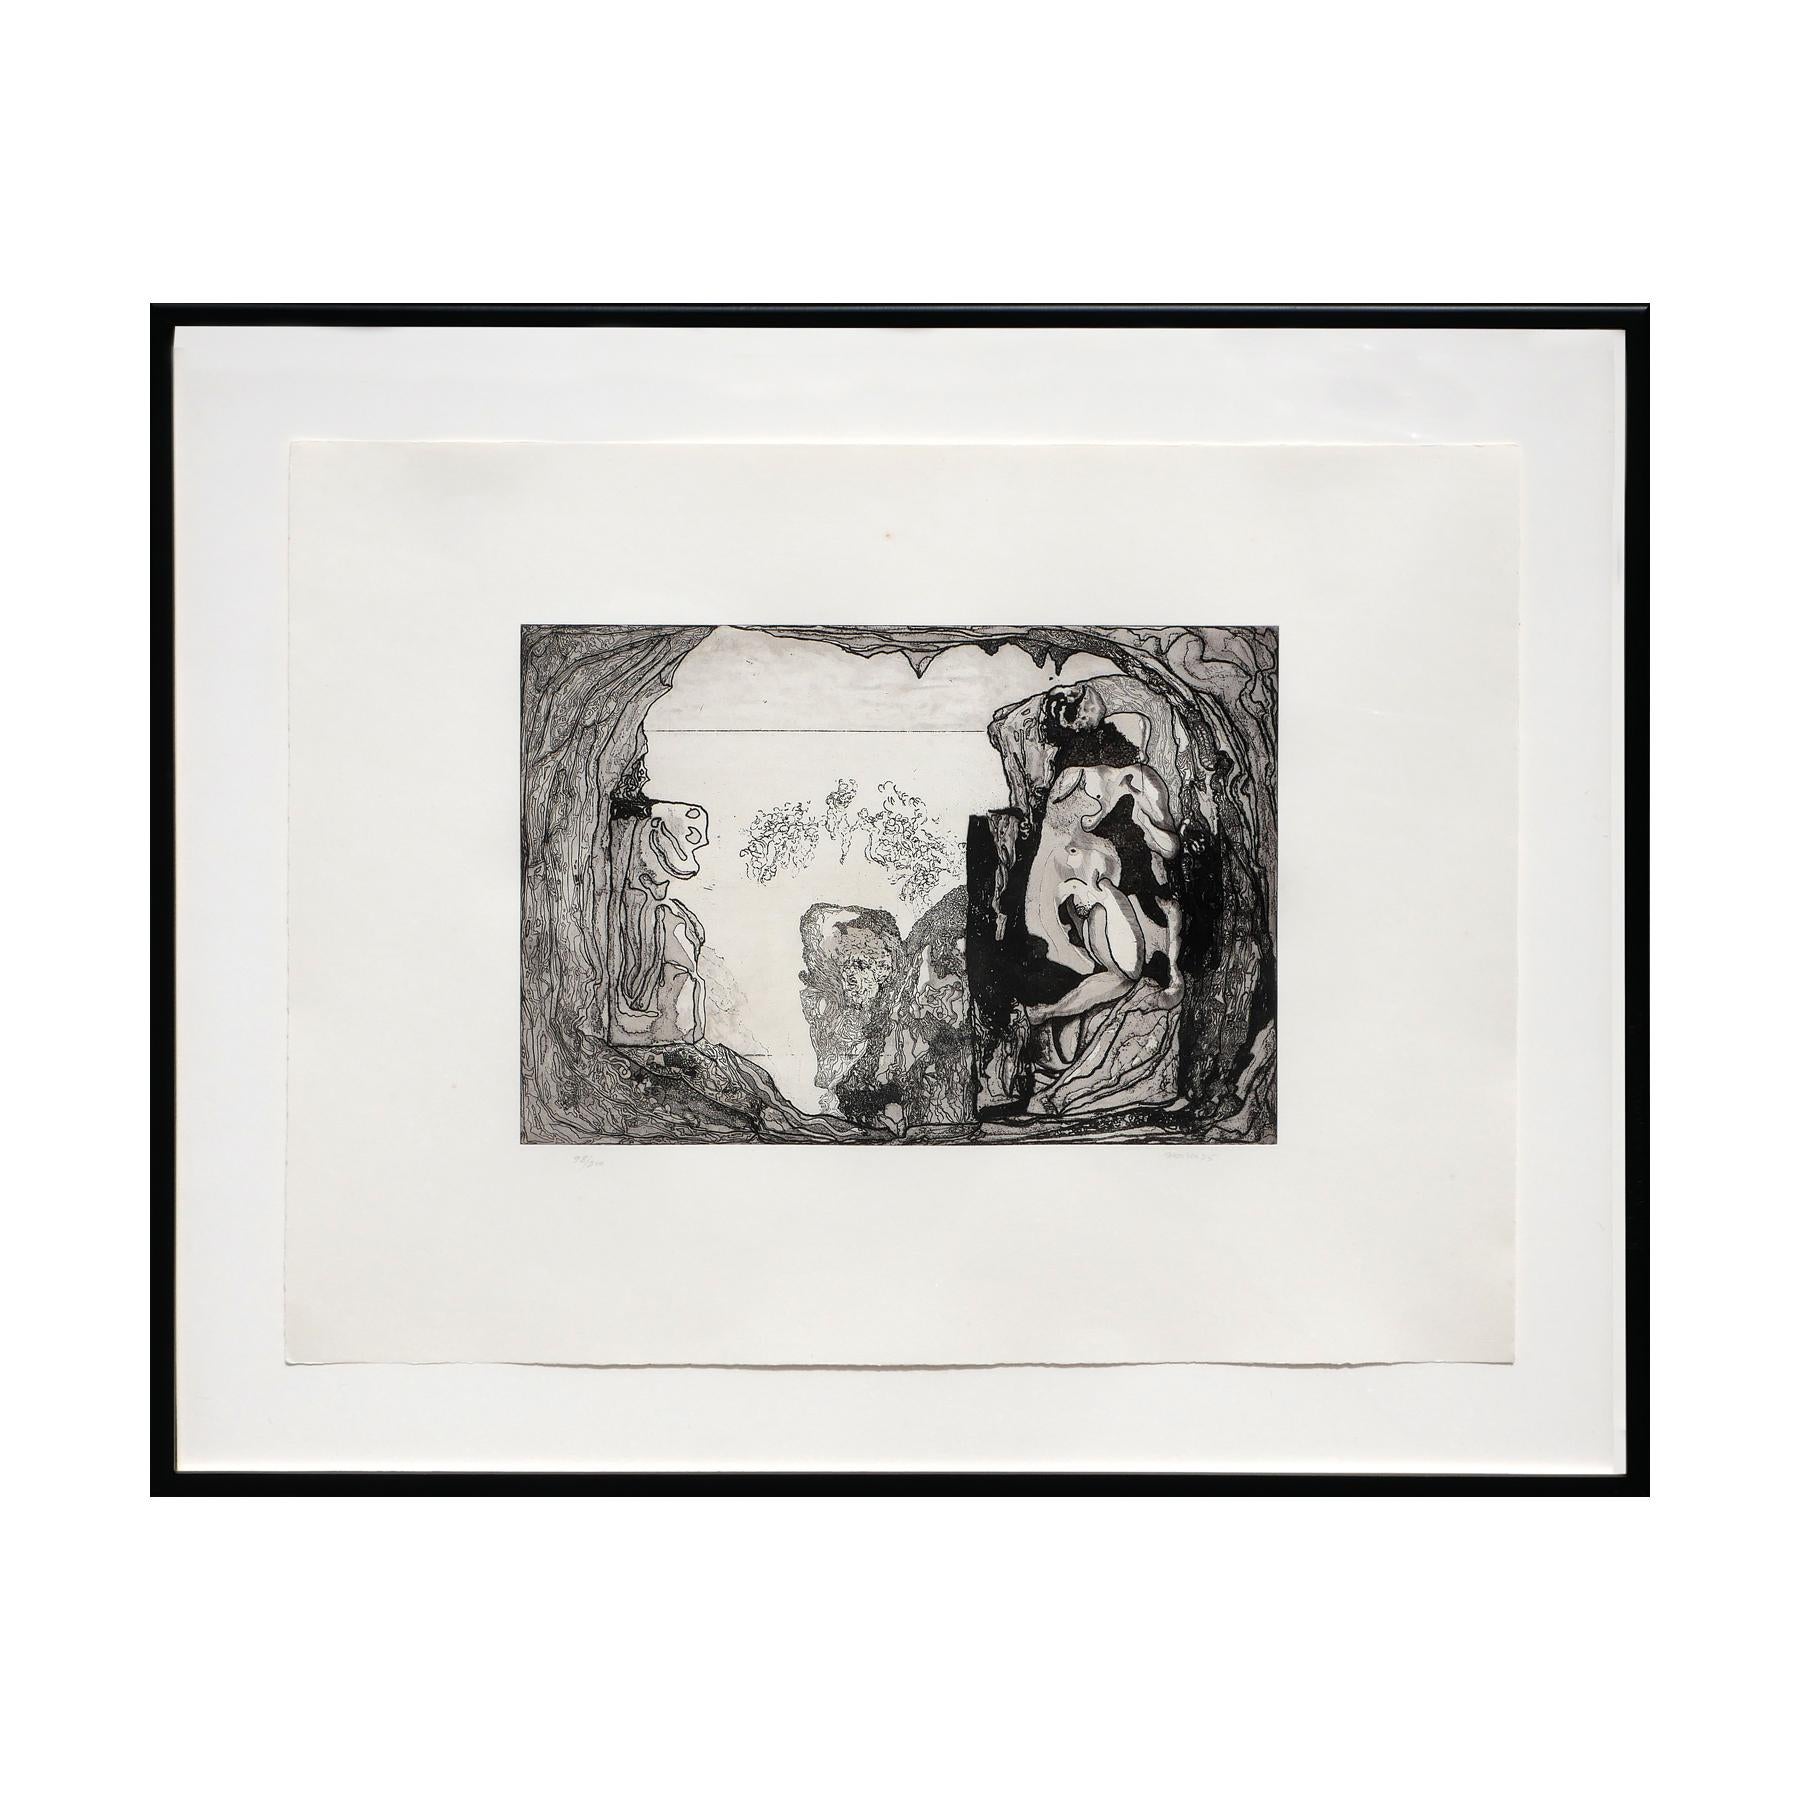 Black and White Abstract Figurative Etching Edition 98/200 - Print by Jorge Castillo